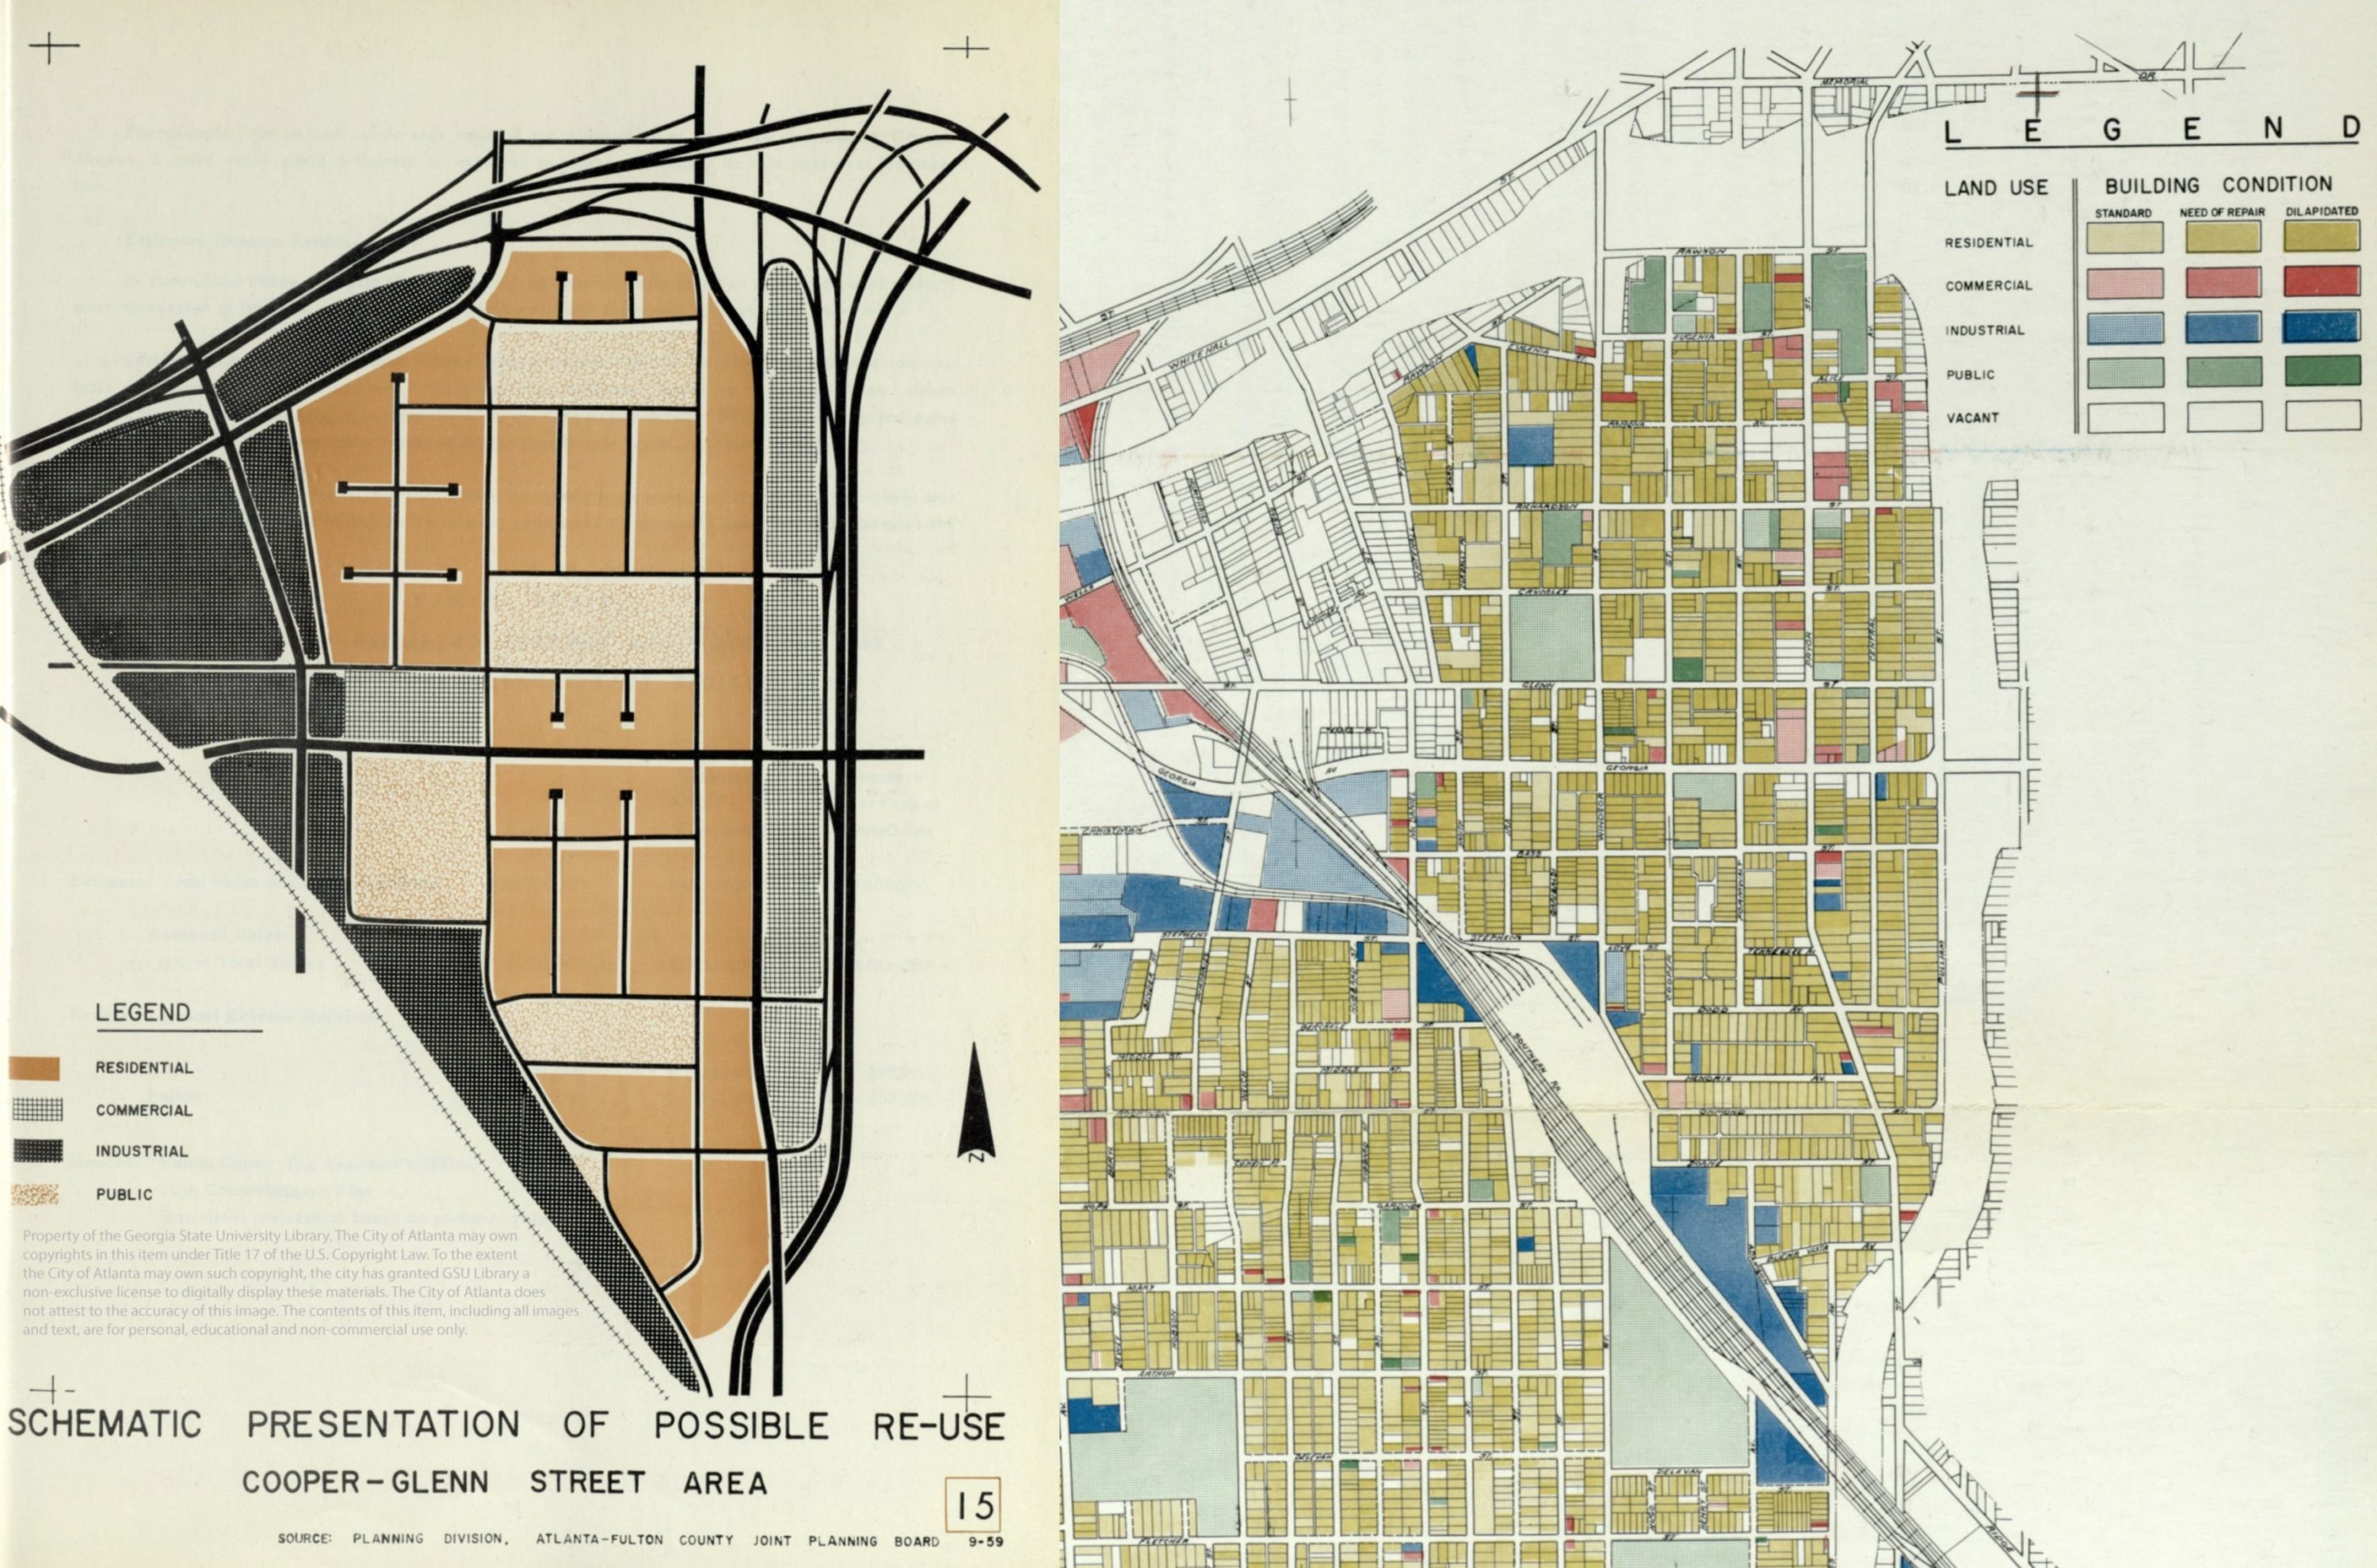 This Schematic Presentation of Possible Re-Use shows how city planners sought to segment and “harmonize” land use and disrupt the street grid pattern. The second map depicts actual land uses at the time in 1959.